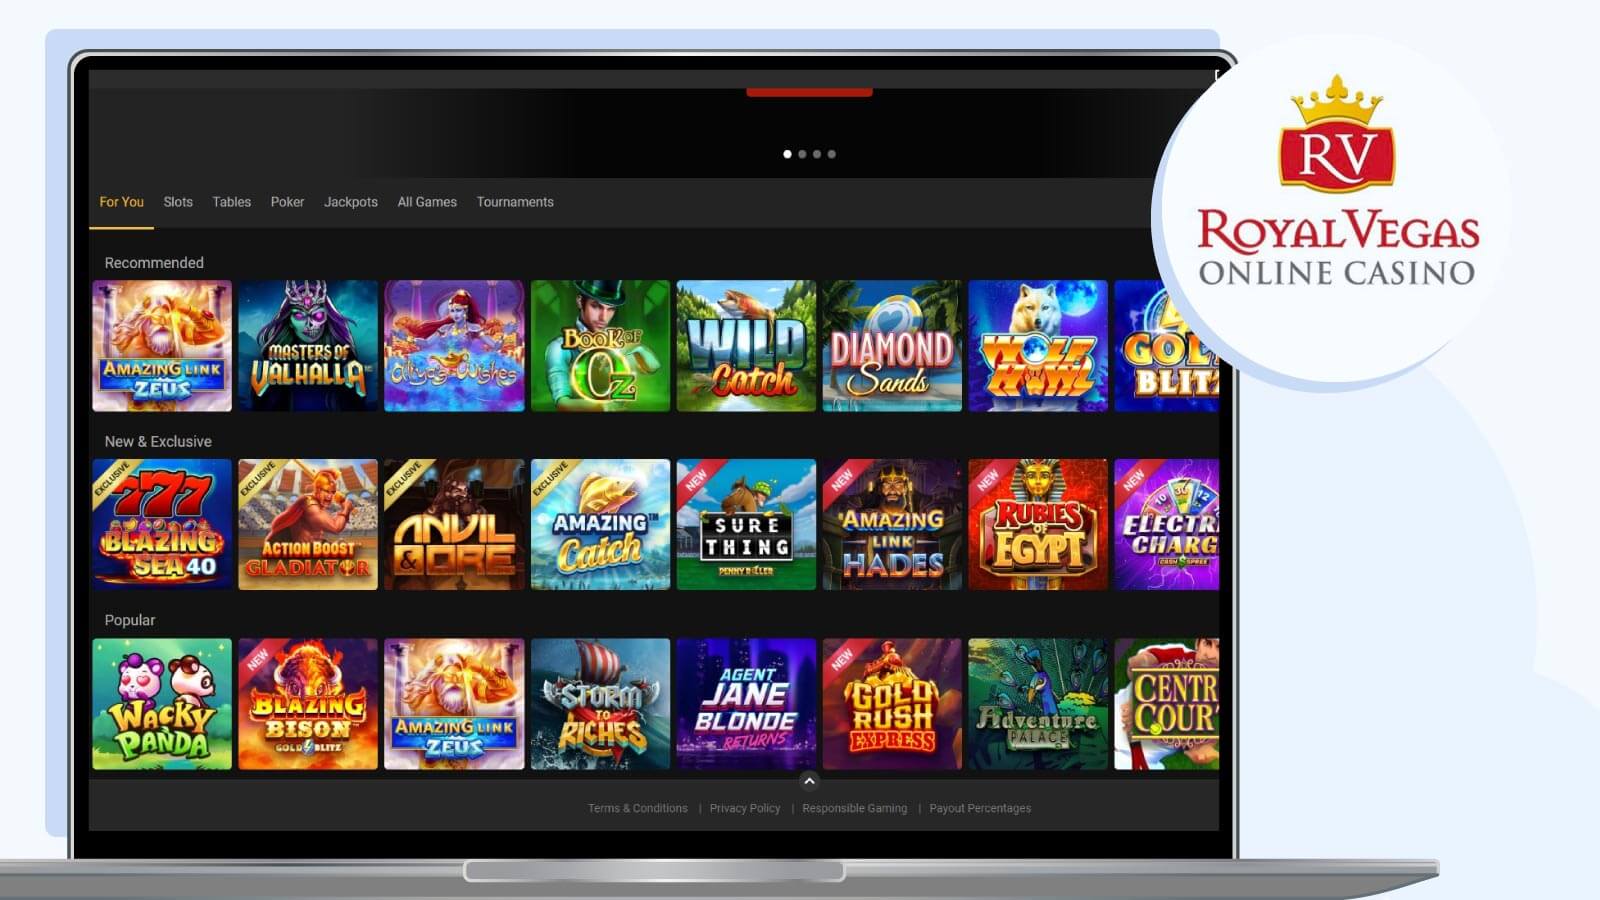 Royal-Vegas-Online-Casino-preview-home-page